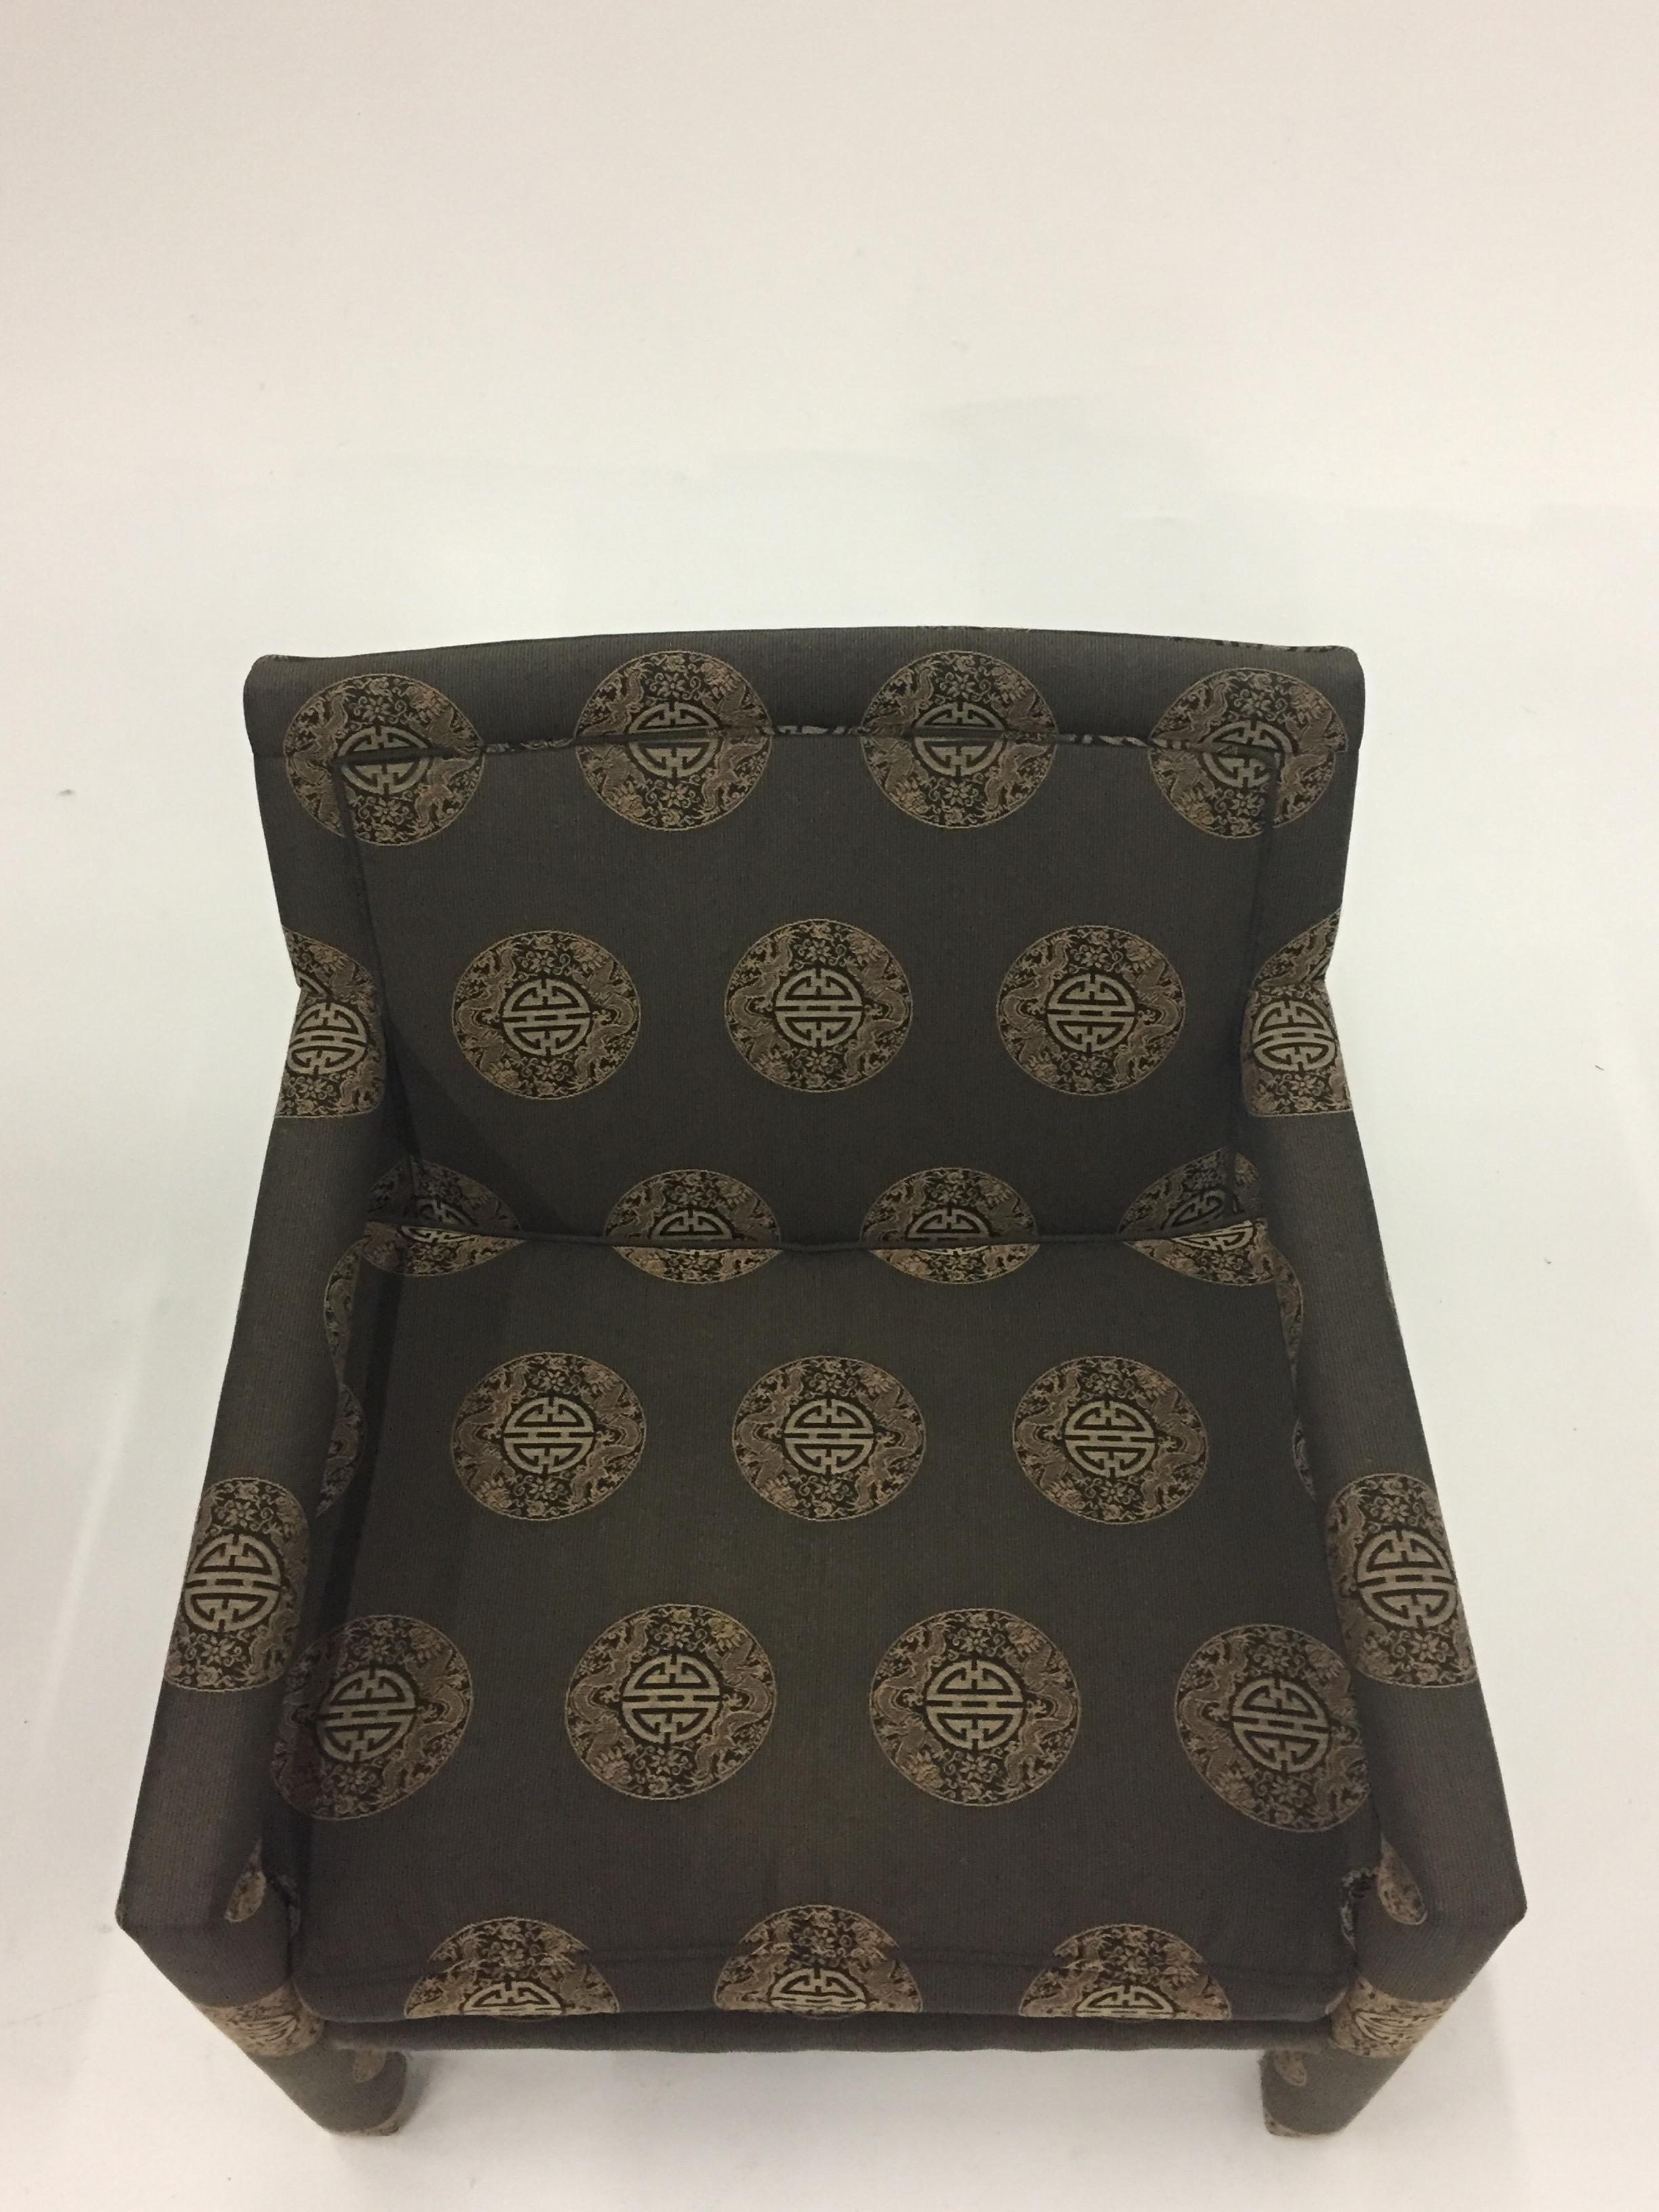 Sophisticated pair of upholstered club chairs attributed to Milo Baughman having
an Asian circular geometric pattern. The arms and legs are also seamlessly upholstered to give a sleek contemporary look.
Chairs are circa 1970, upholstery is much